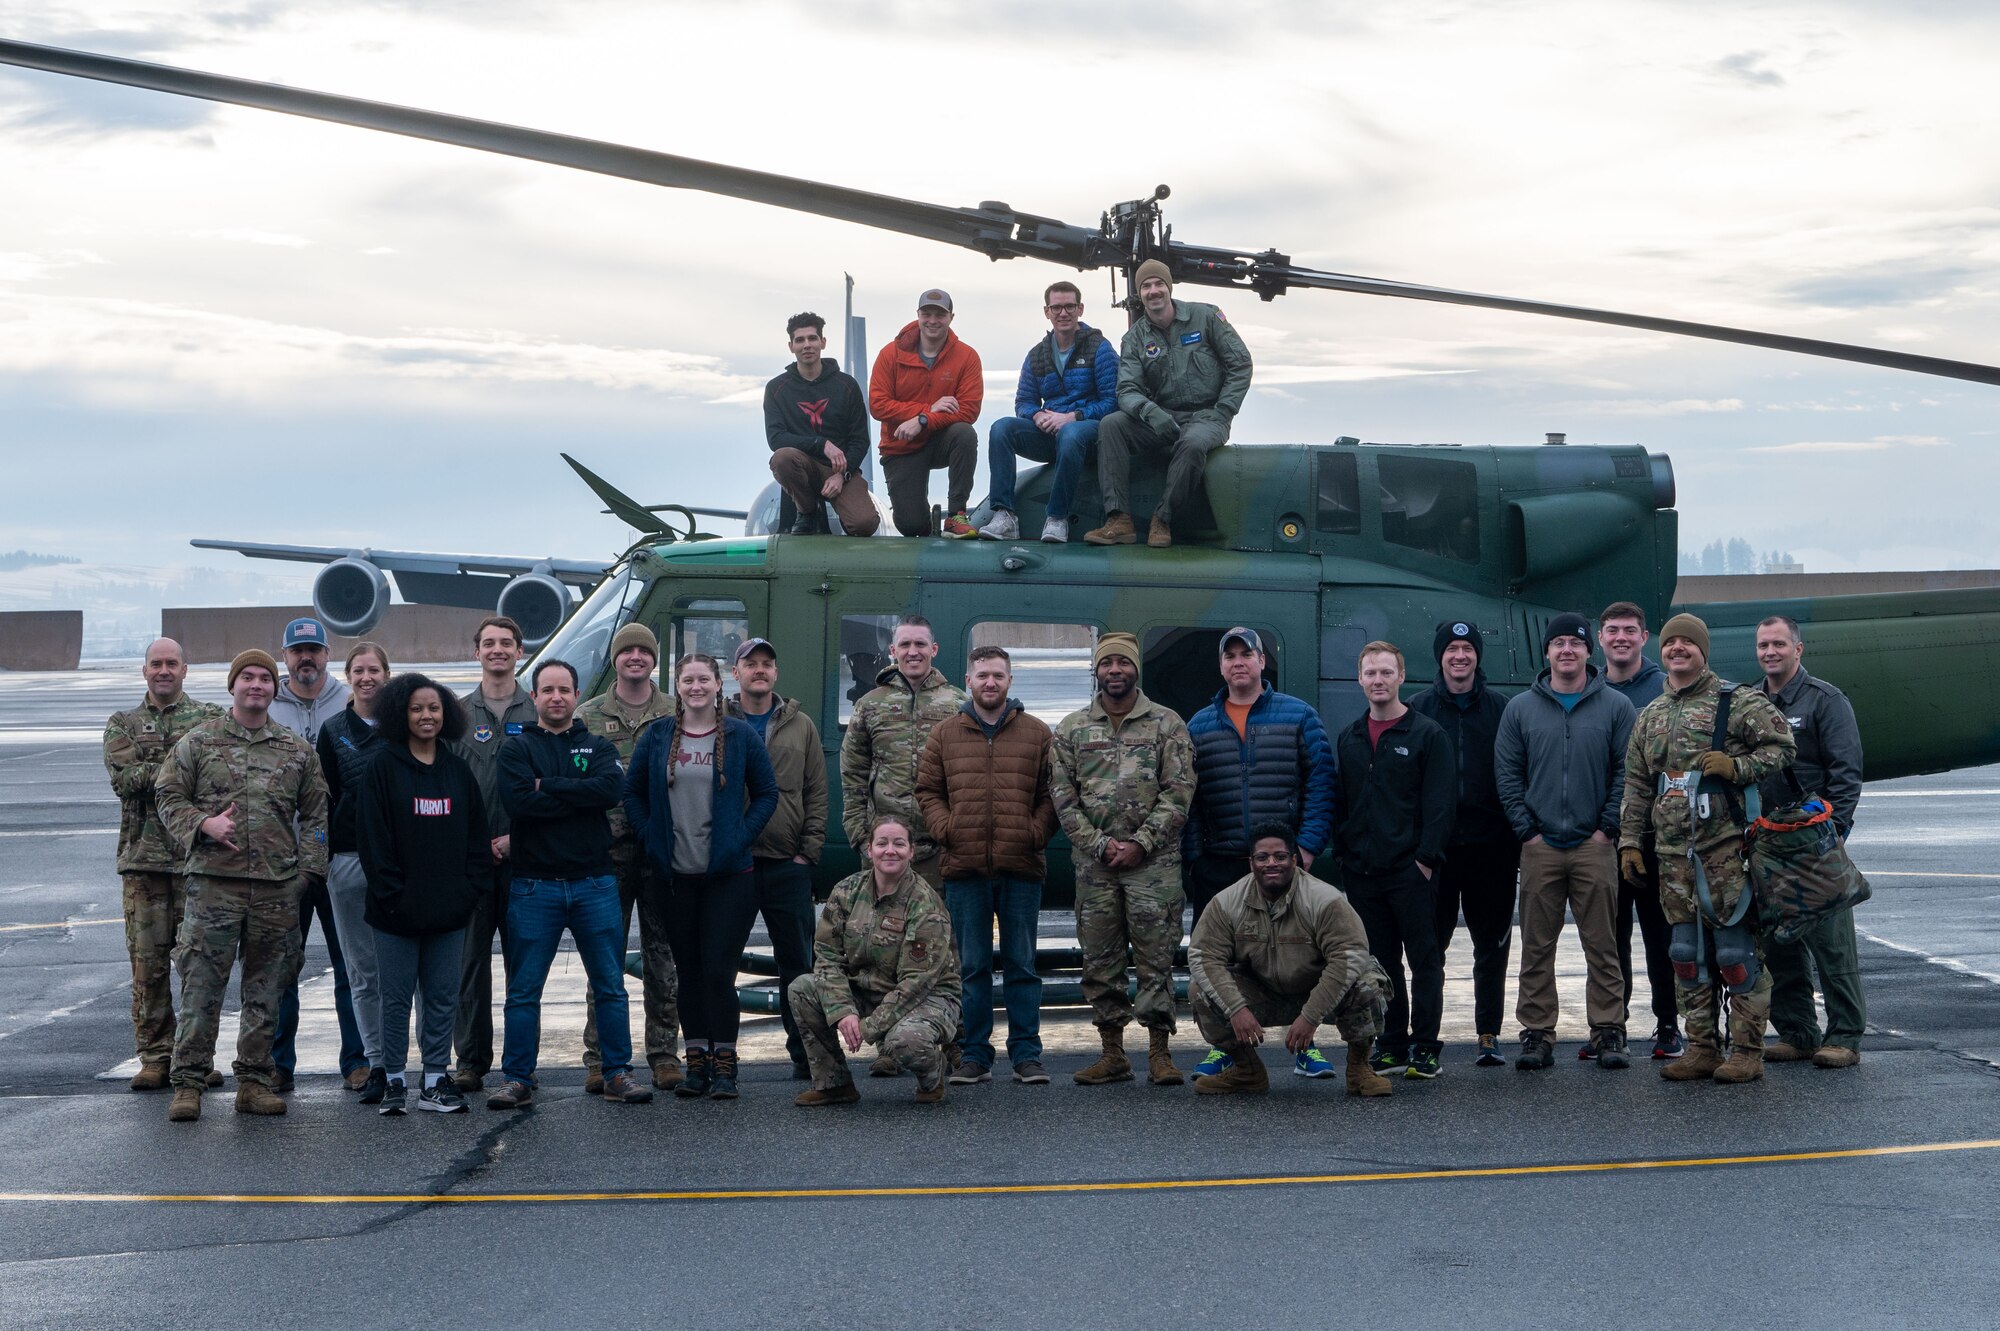 U.S. Air Force Airmen and civilians from the 36th Rescue Squadron pose with UH-1N Huey number 6648 after its completion of 20,000 flight hours at Fairchild Air Force Base, Washington, Jan. 13, 2023. The 36th RQS also has the most diverse mission set of any singular UH-1N unit in the Air Force supporting the 336th Training Group’s Survival, Evasion, Resistance, and Escape (SERE) training, medical evacuation, cargo sling, water survival training and pararescue drop. (U.S. Air Force photo by Airman 1st Class Stassney Davis)